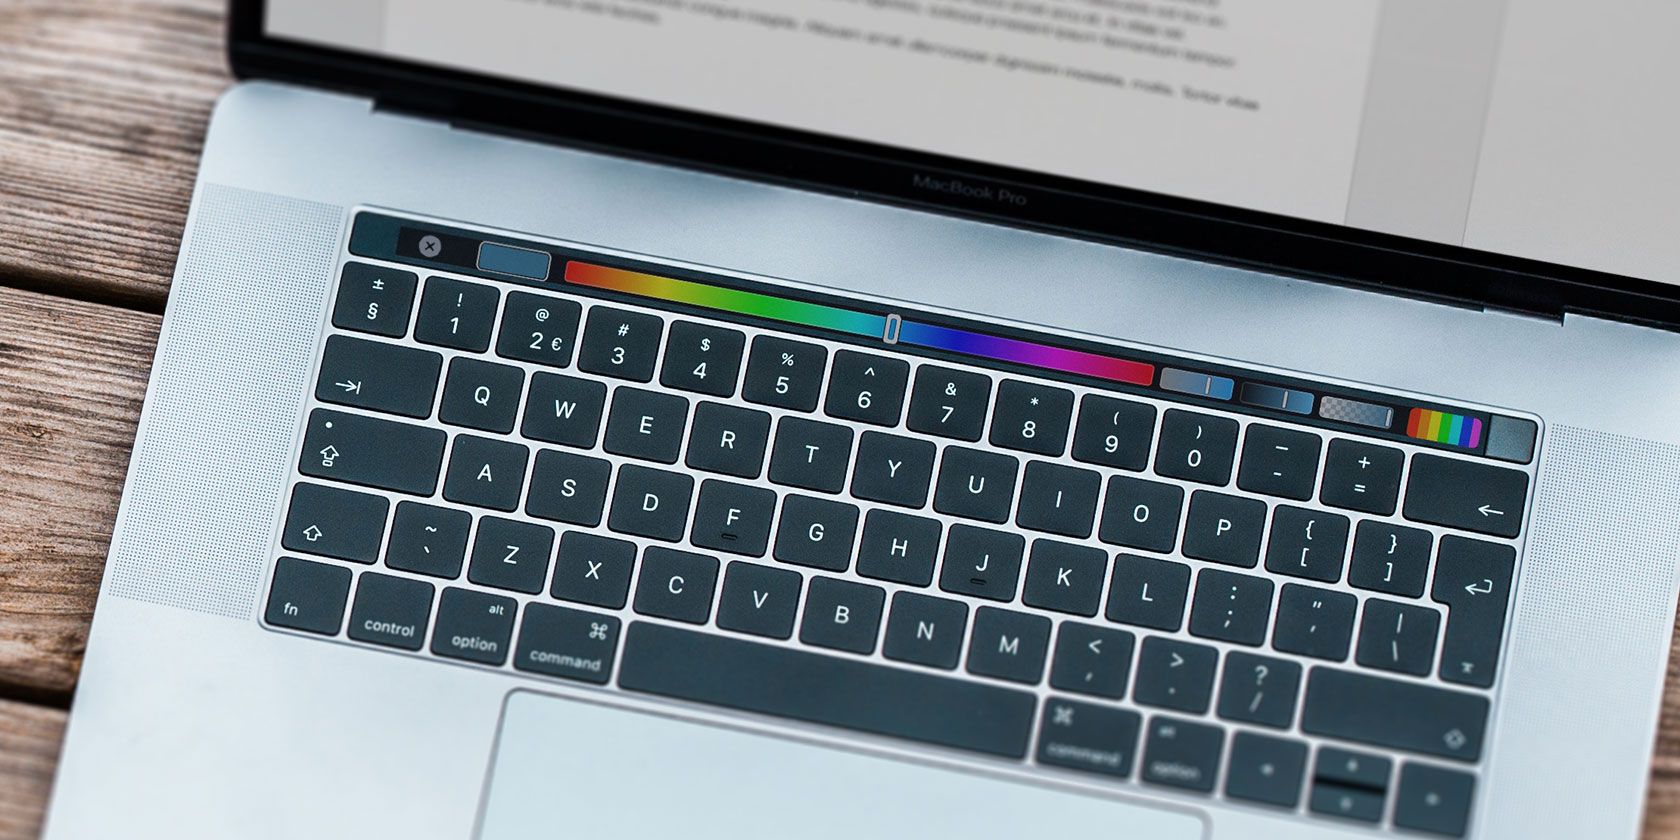 must have apps for macbook pro touch bar